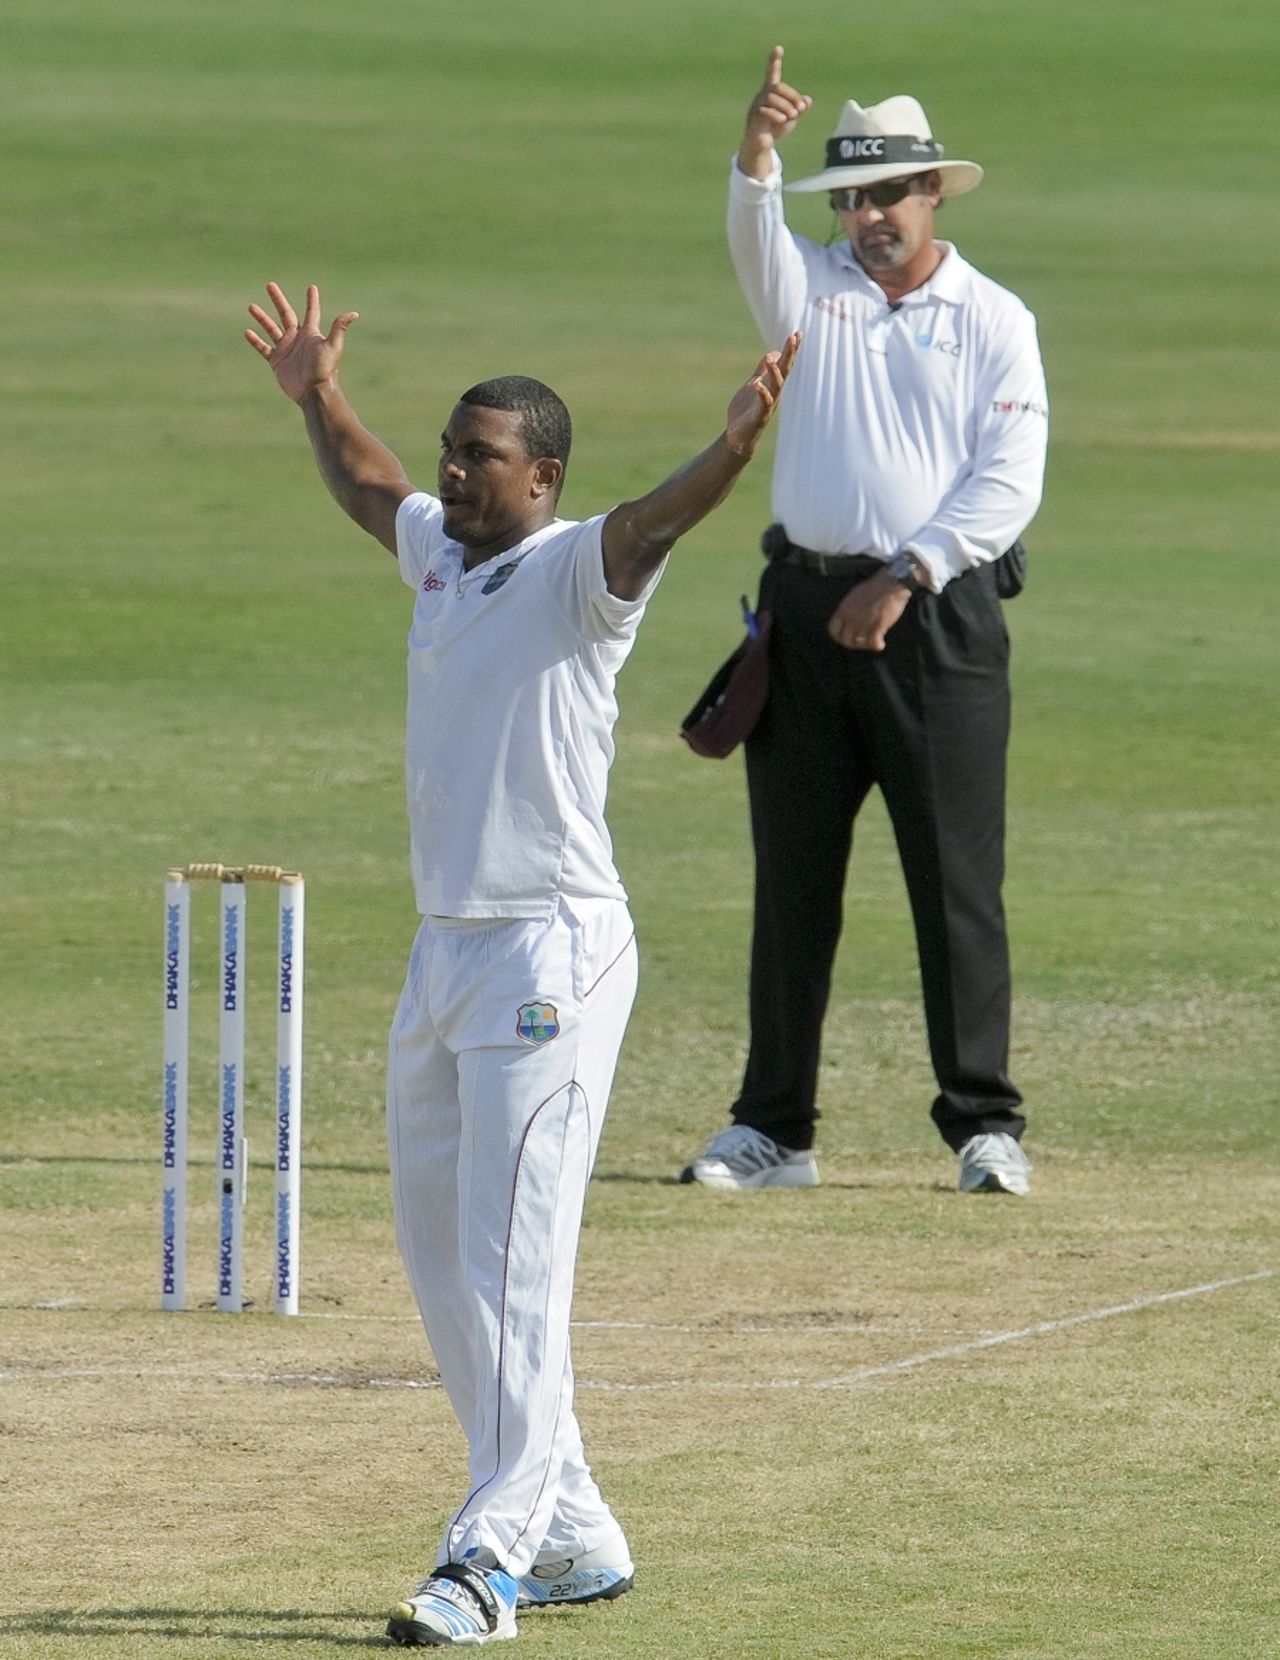 Shannon Gabriel won an lbw appeal against Mahmudullah, West Indies v Bangladesh, 2nd Test, St. Lucia, 4th day, September 16, 2014